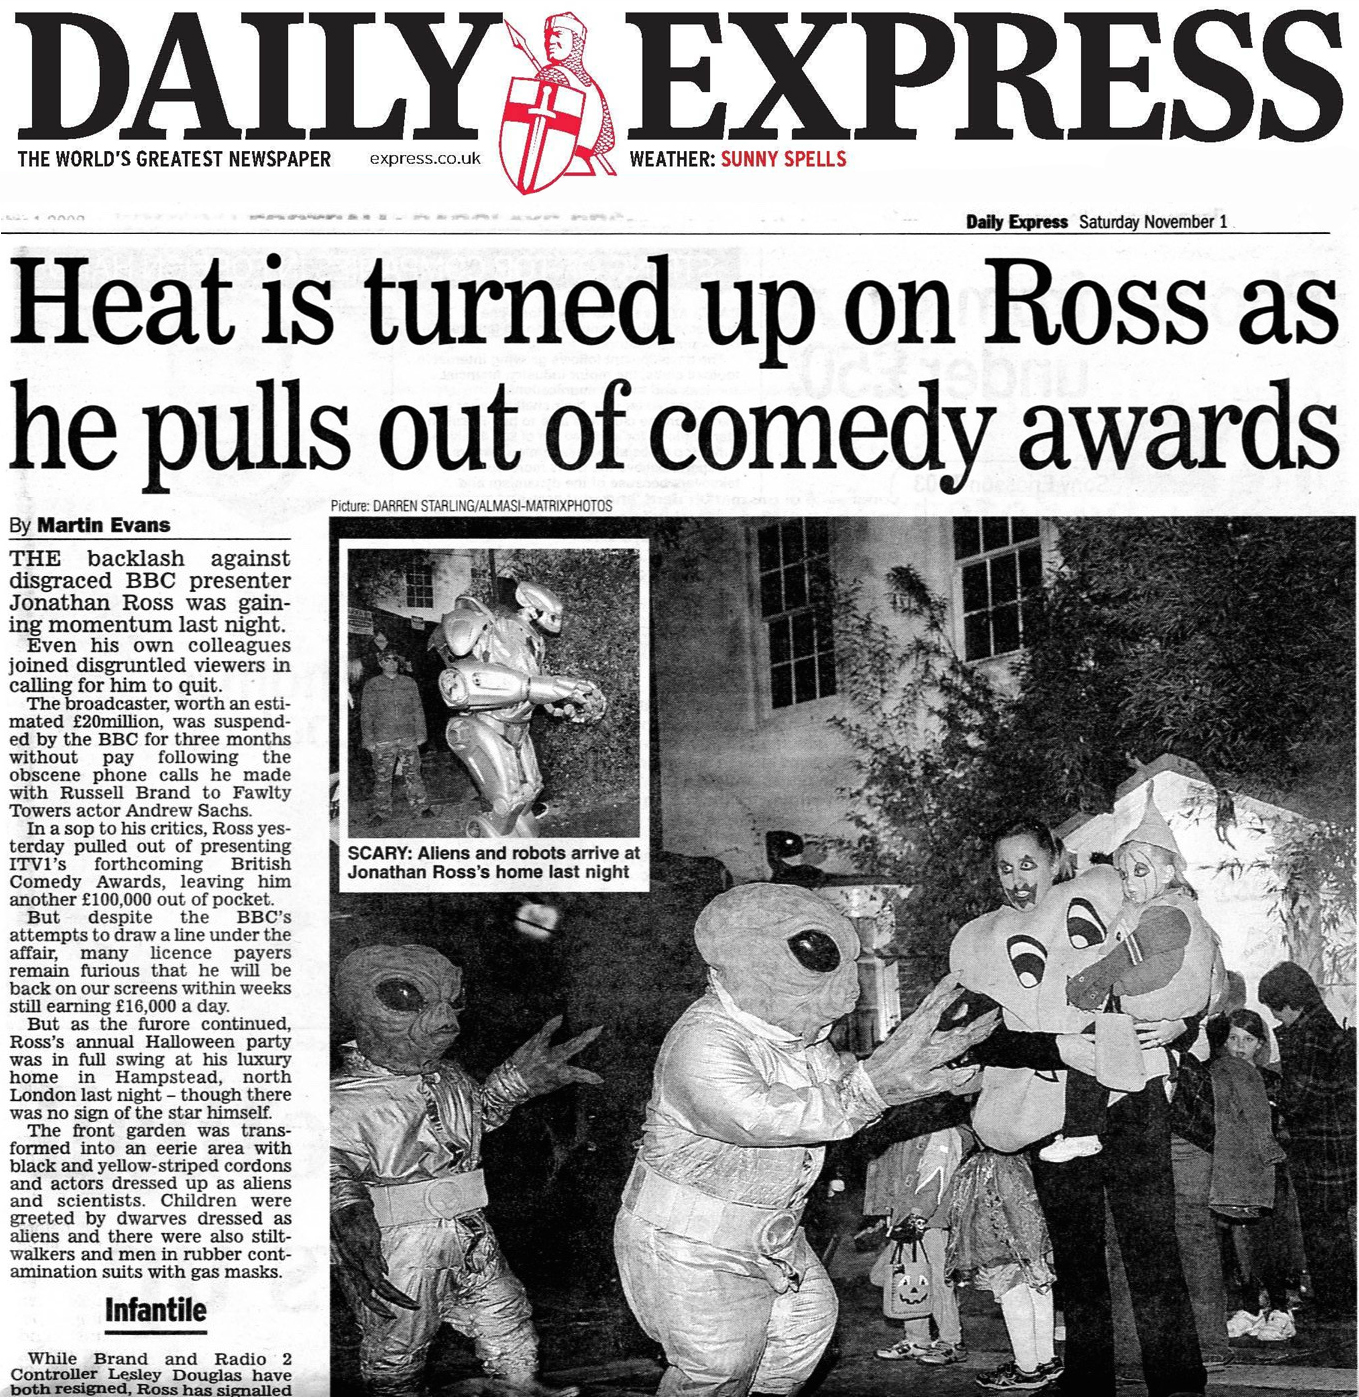 Titan the Robot in the Daily Express newspaper when he went to Jonathan Ross's famous halloween party